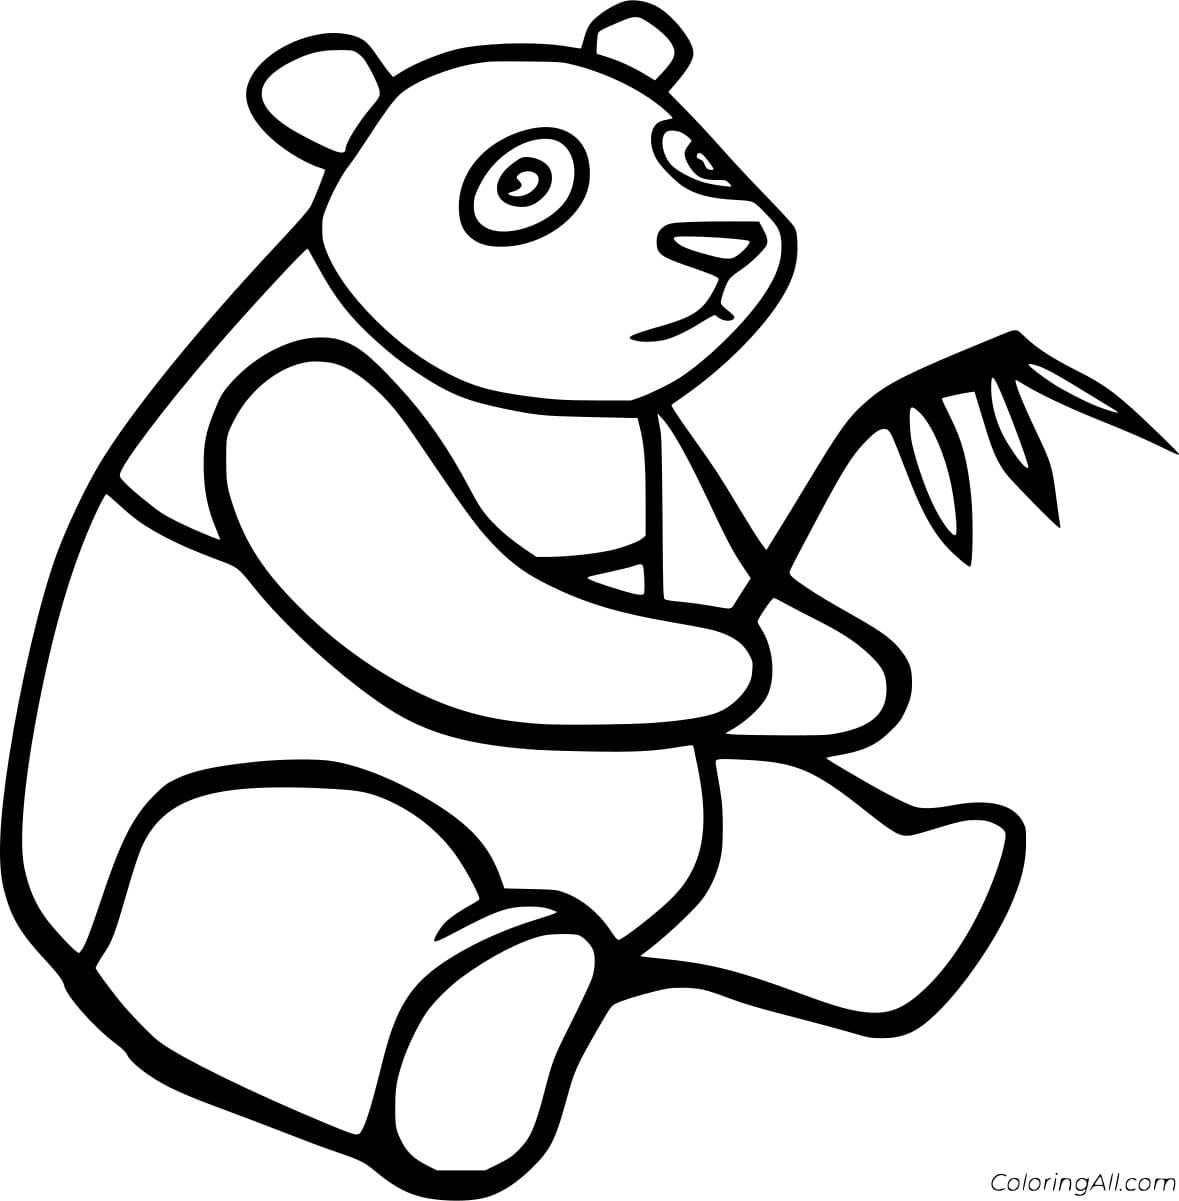 Panda Holds A Bamboo Coloring Page